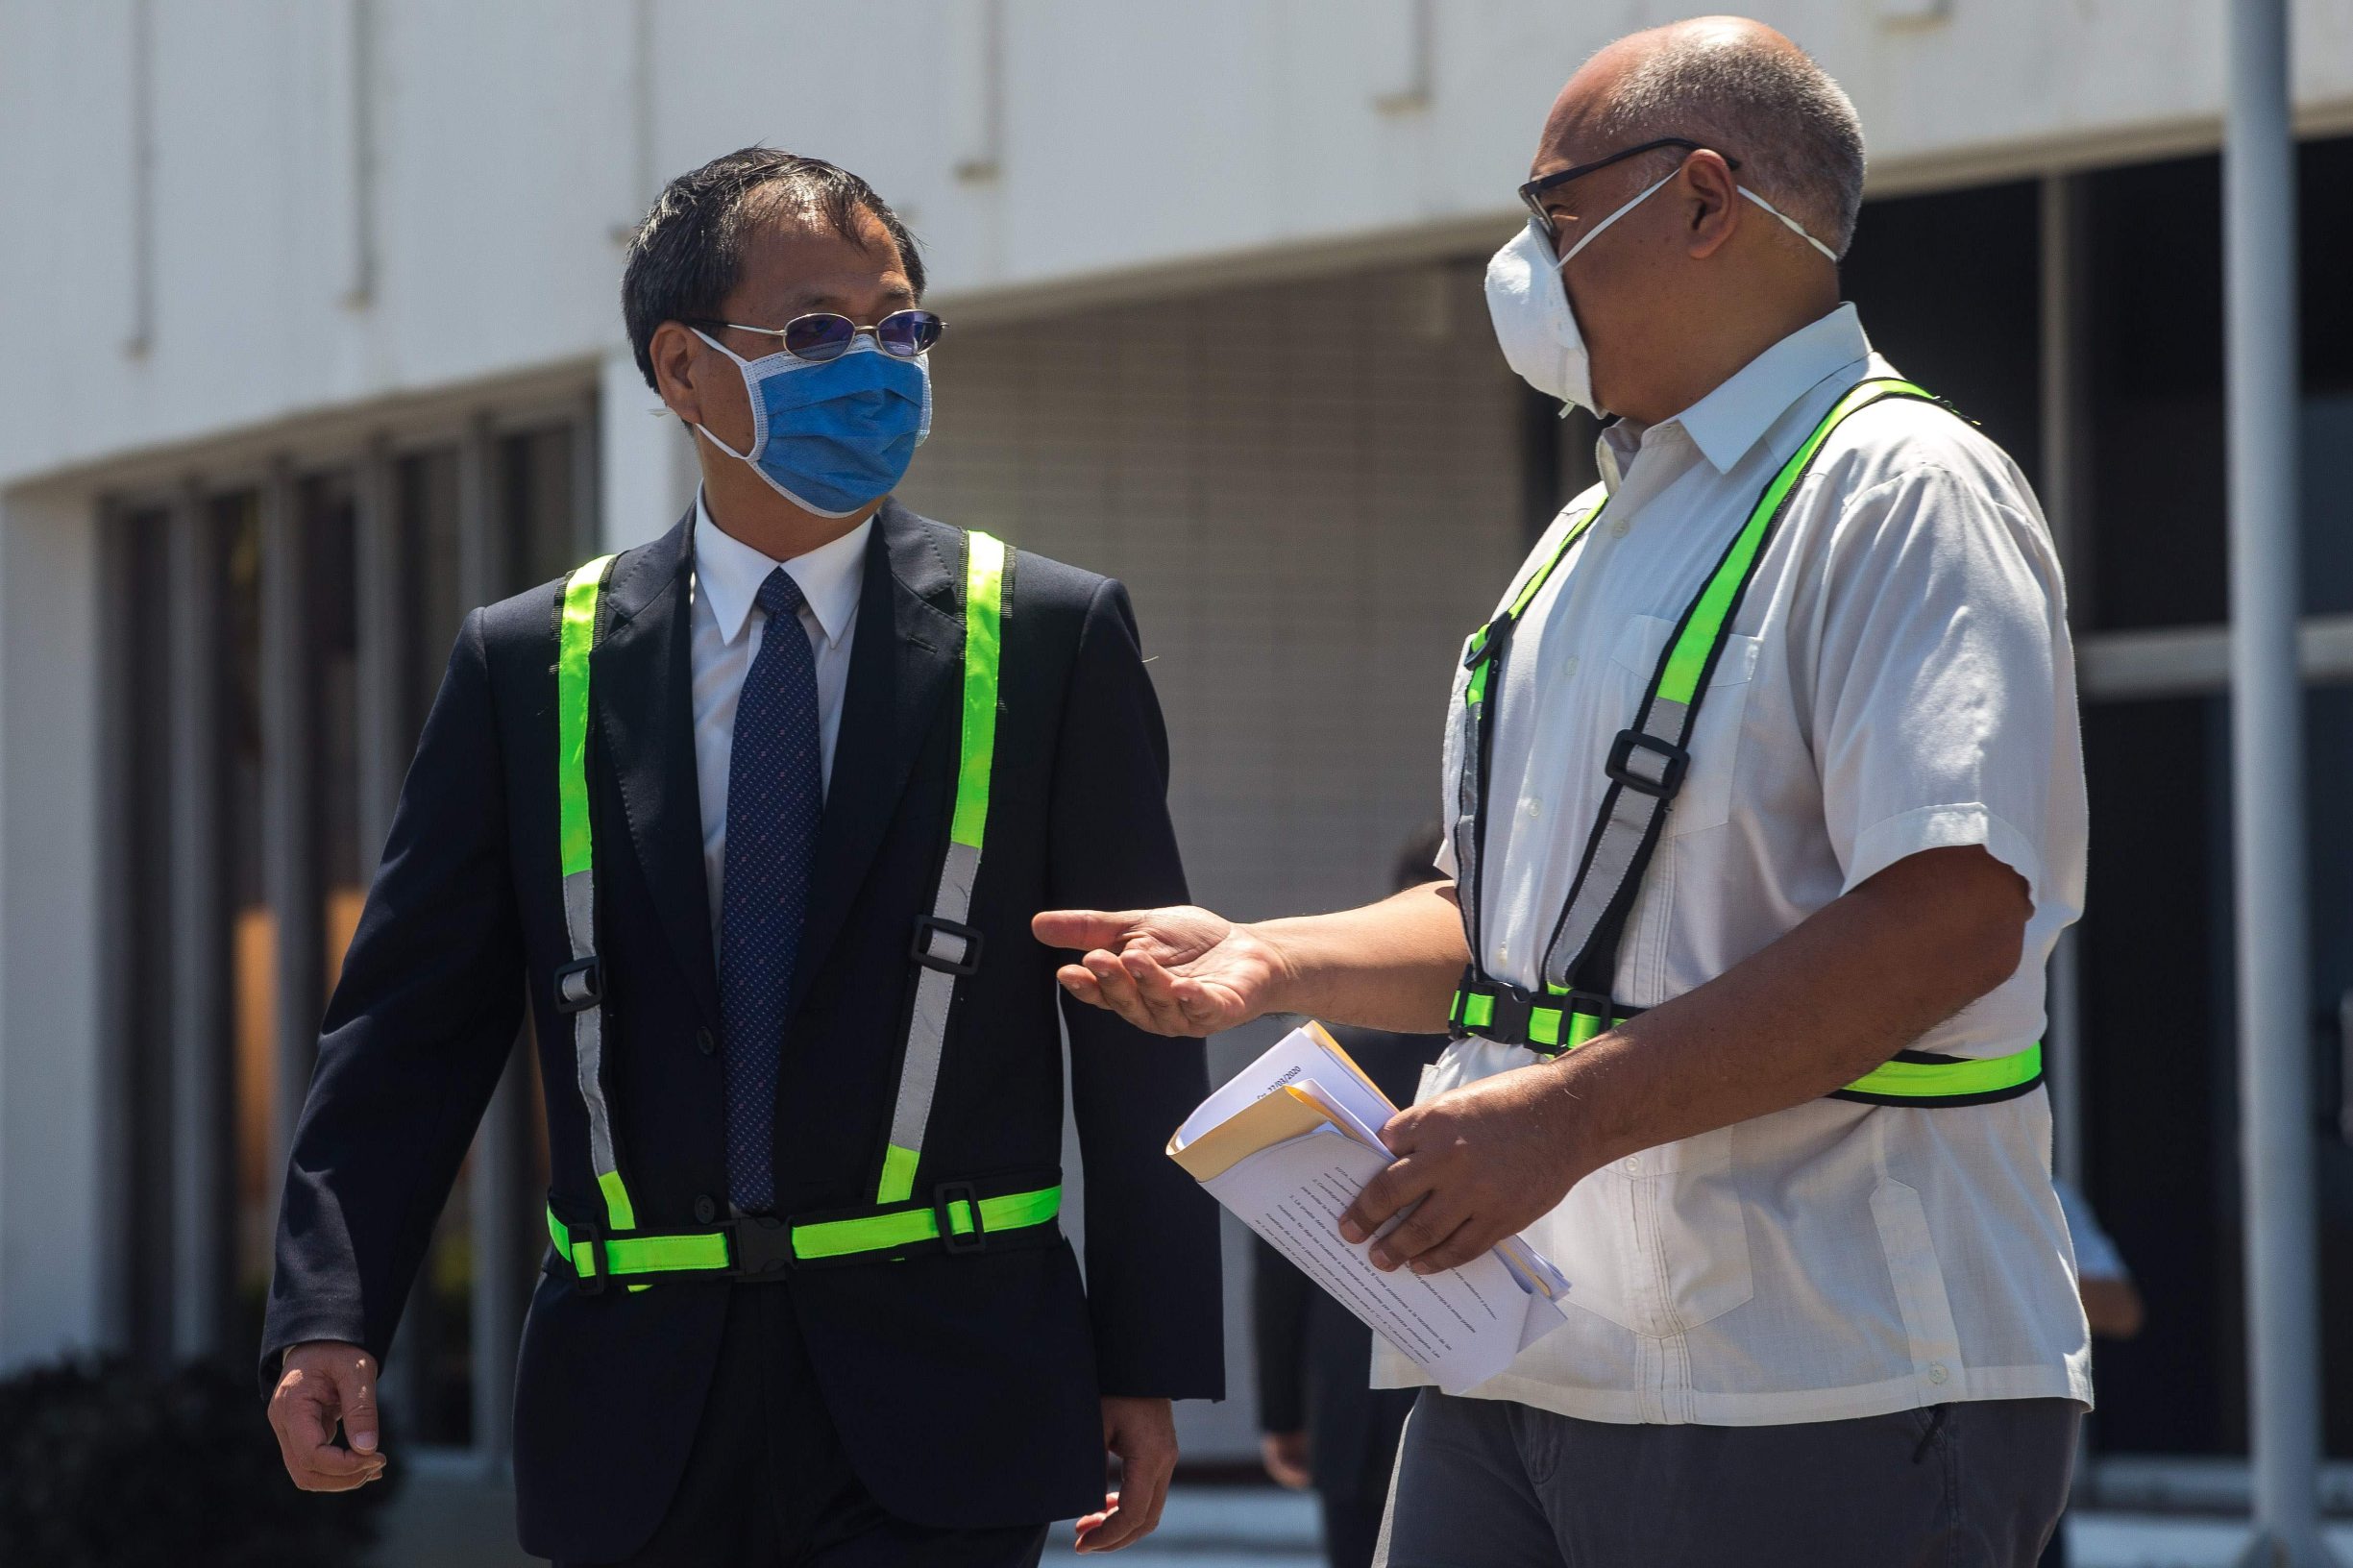 Venezuela's Health Minister Carlos Alvarado Gonzalez (R) speaks with the People's Republic of China's ambassador to Venezuela, Li Baorong (L) -both wearing face masks as a preventive measure against the spread of coronavirus, COVID-19- during the arrival of a 55-ton shipment of humanitarian aid and medical equipment sent from China for the fight against the COVID-19, at the Simon Bolivar International Airport in Maiquetia, Vargas state, Venezuela on March 28, 2020. (Photo by Cristian Hernandez / AFP)